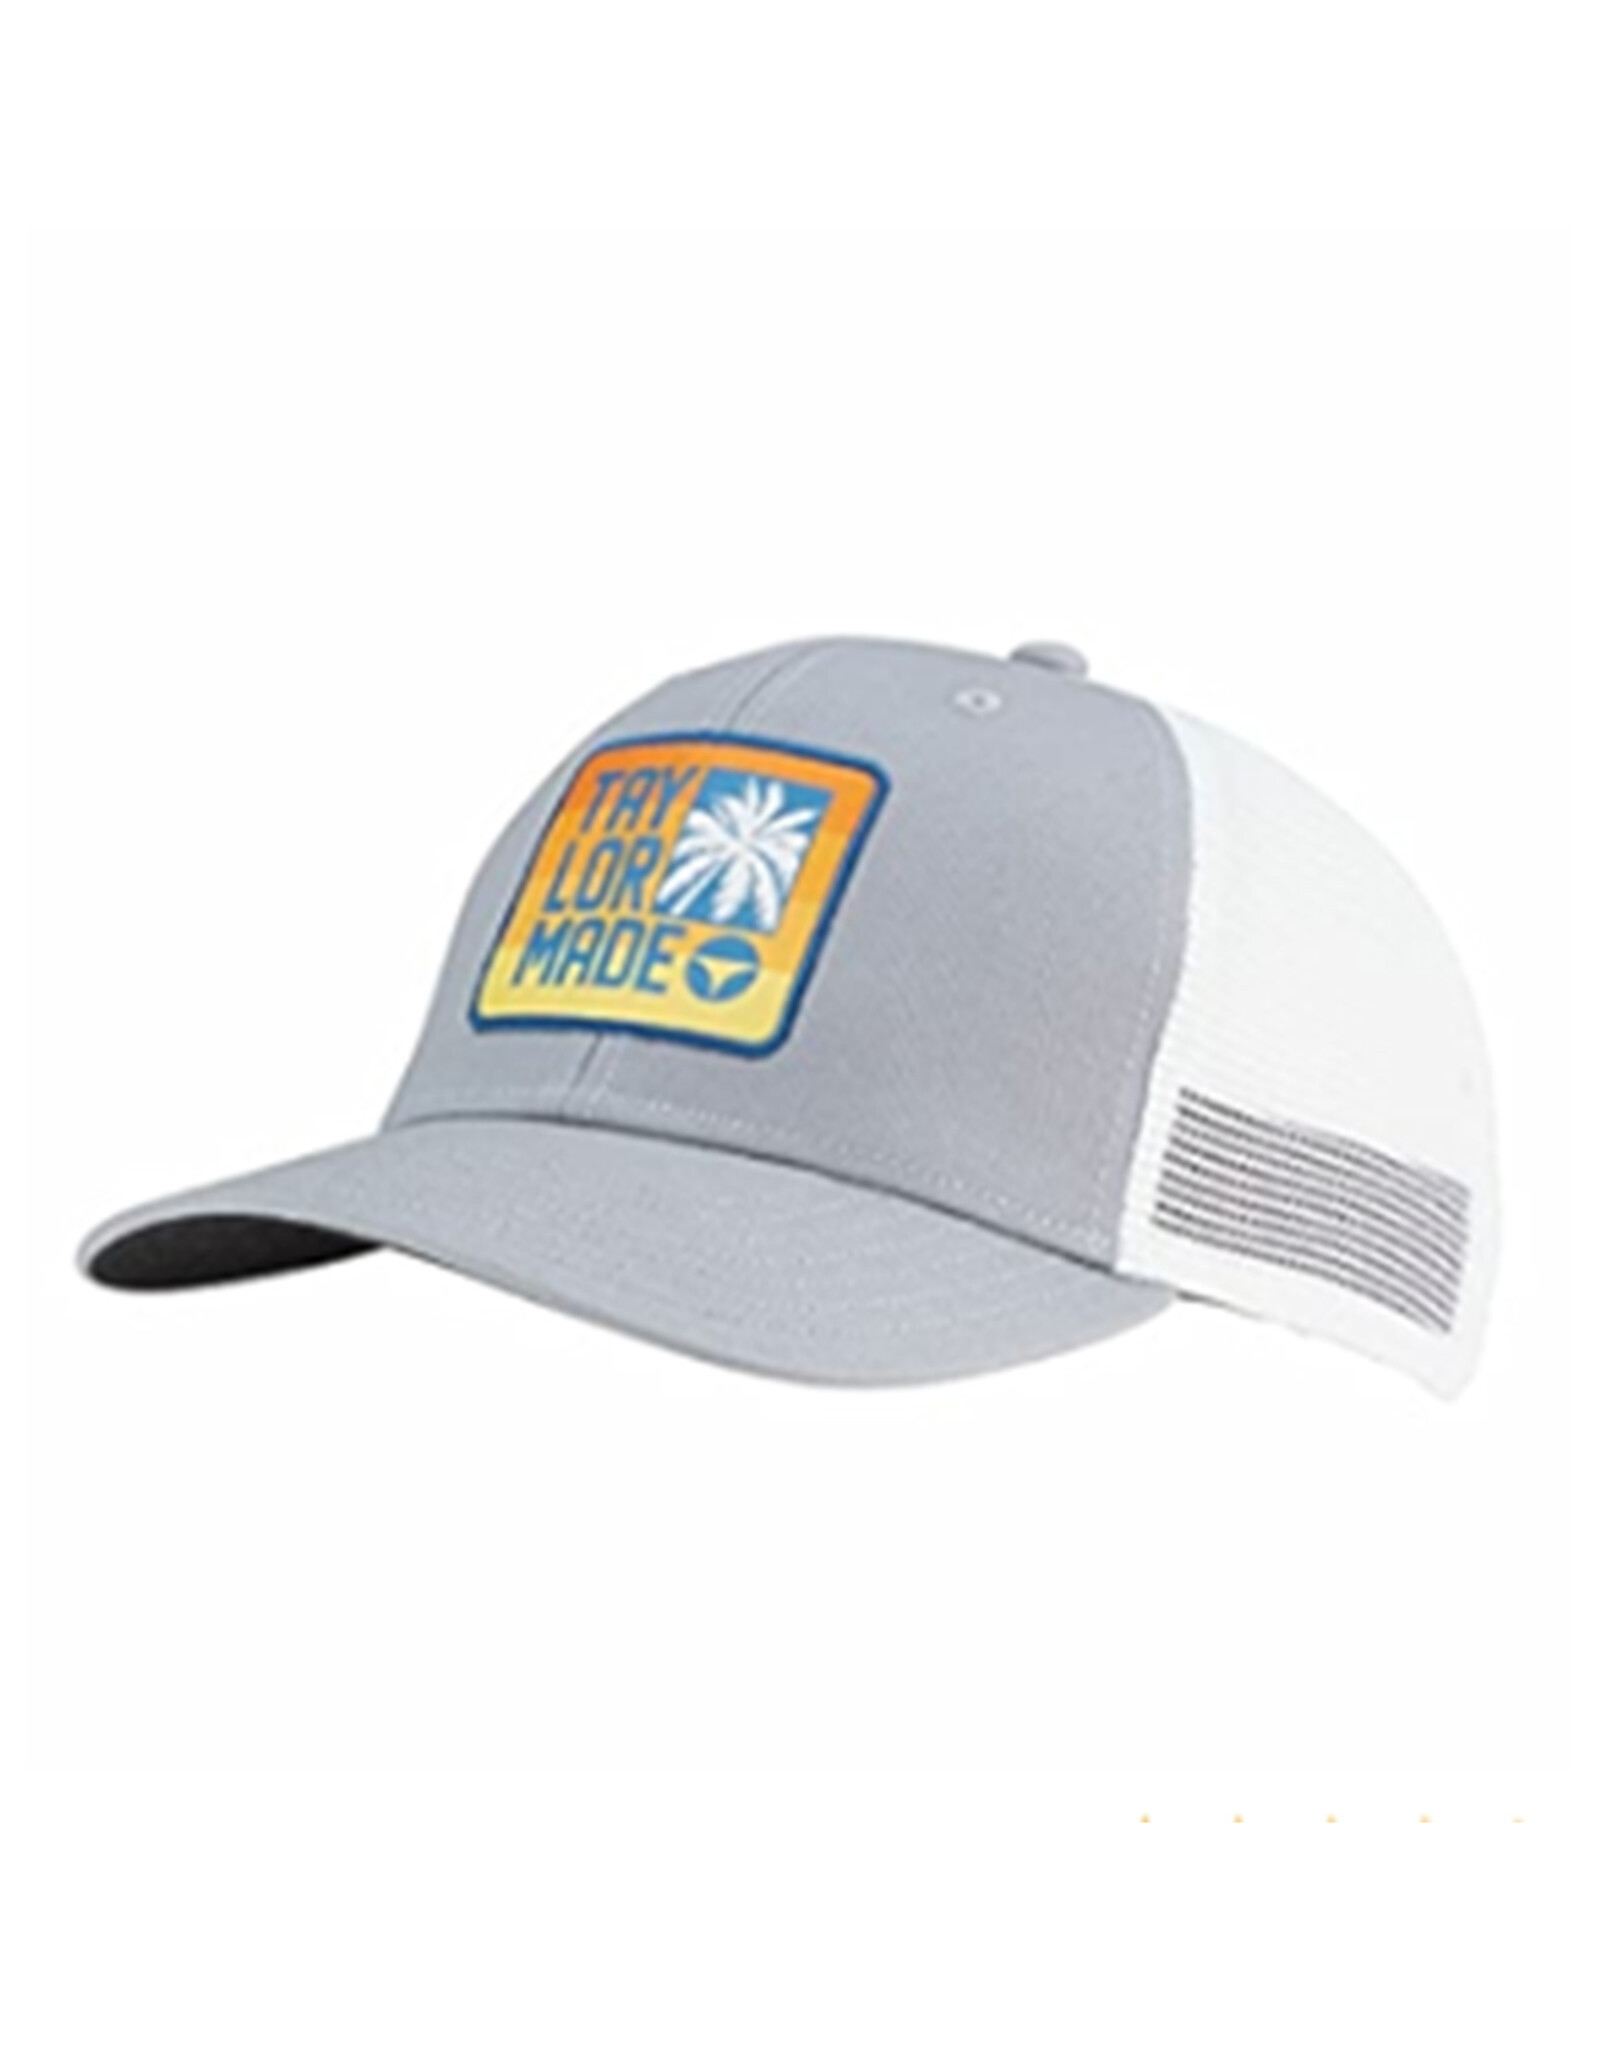 TaylorMade TaylorMade Womens Sunset Trucker Hat